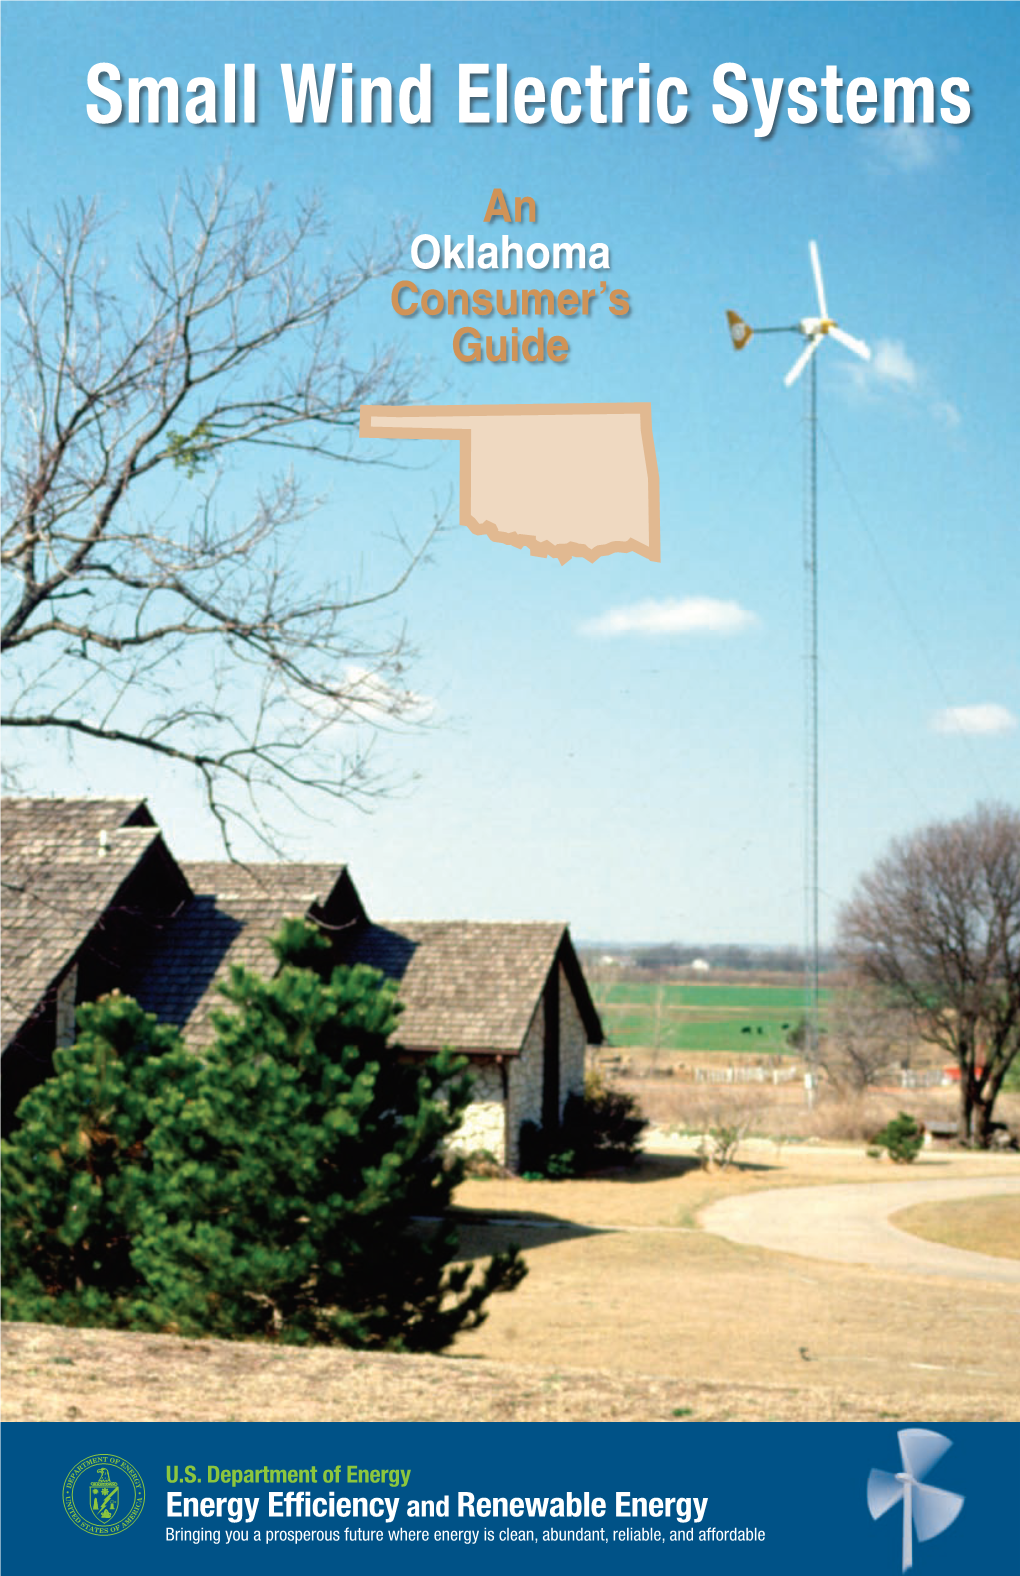 Small Wind Electric Systems: an Oklahoma Consumer's Guide